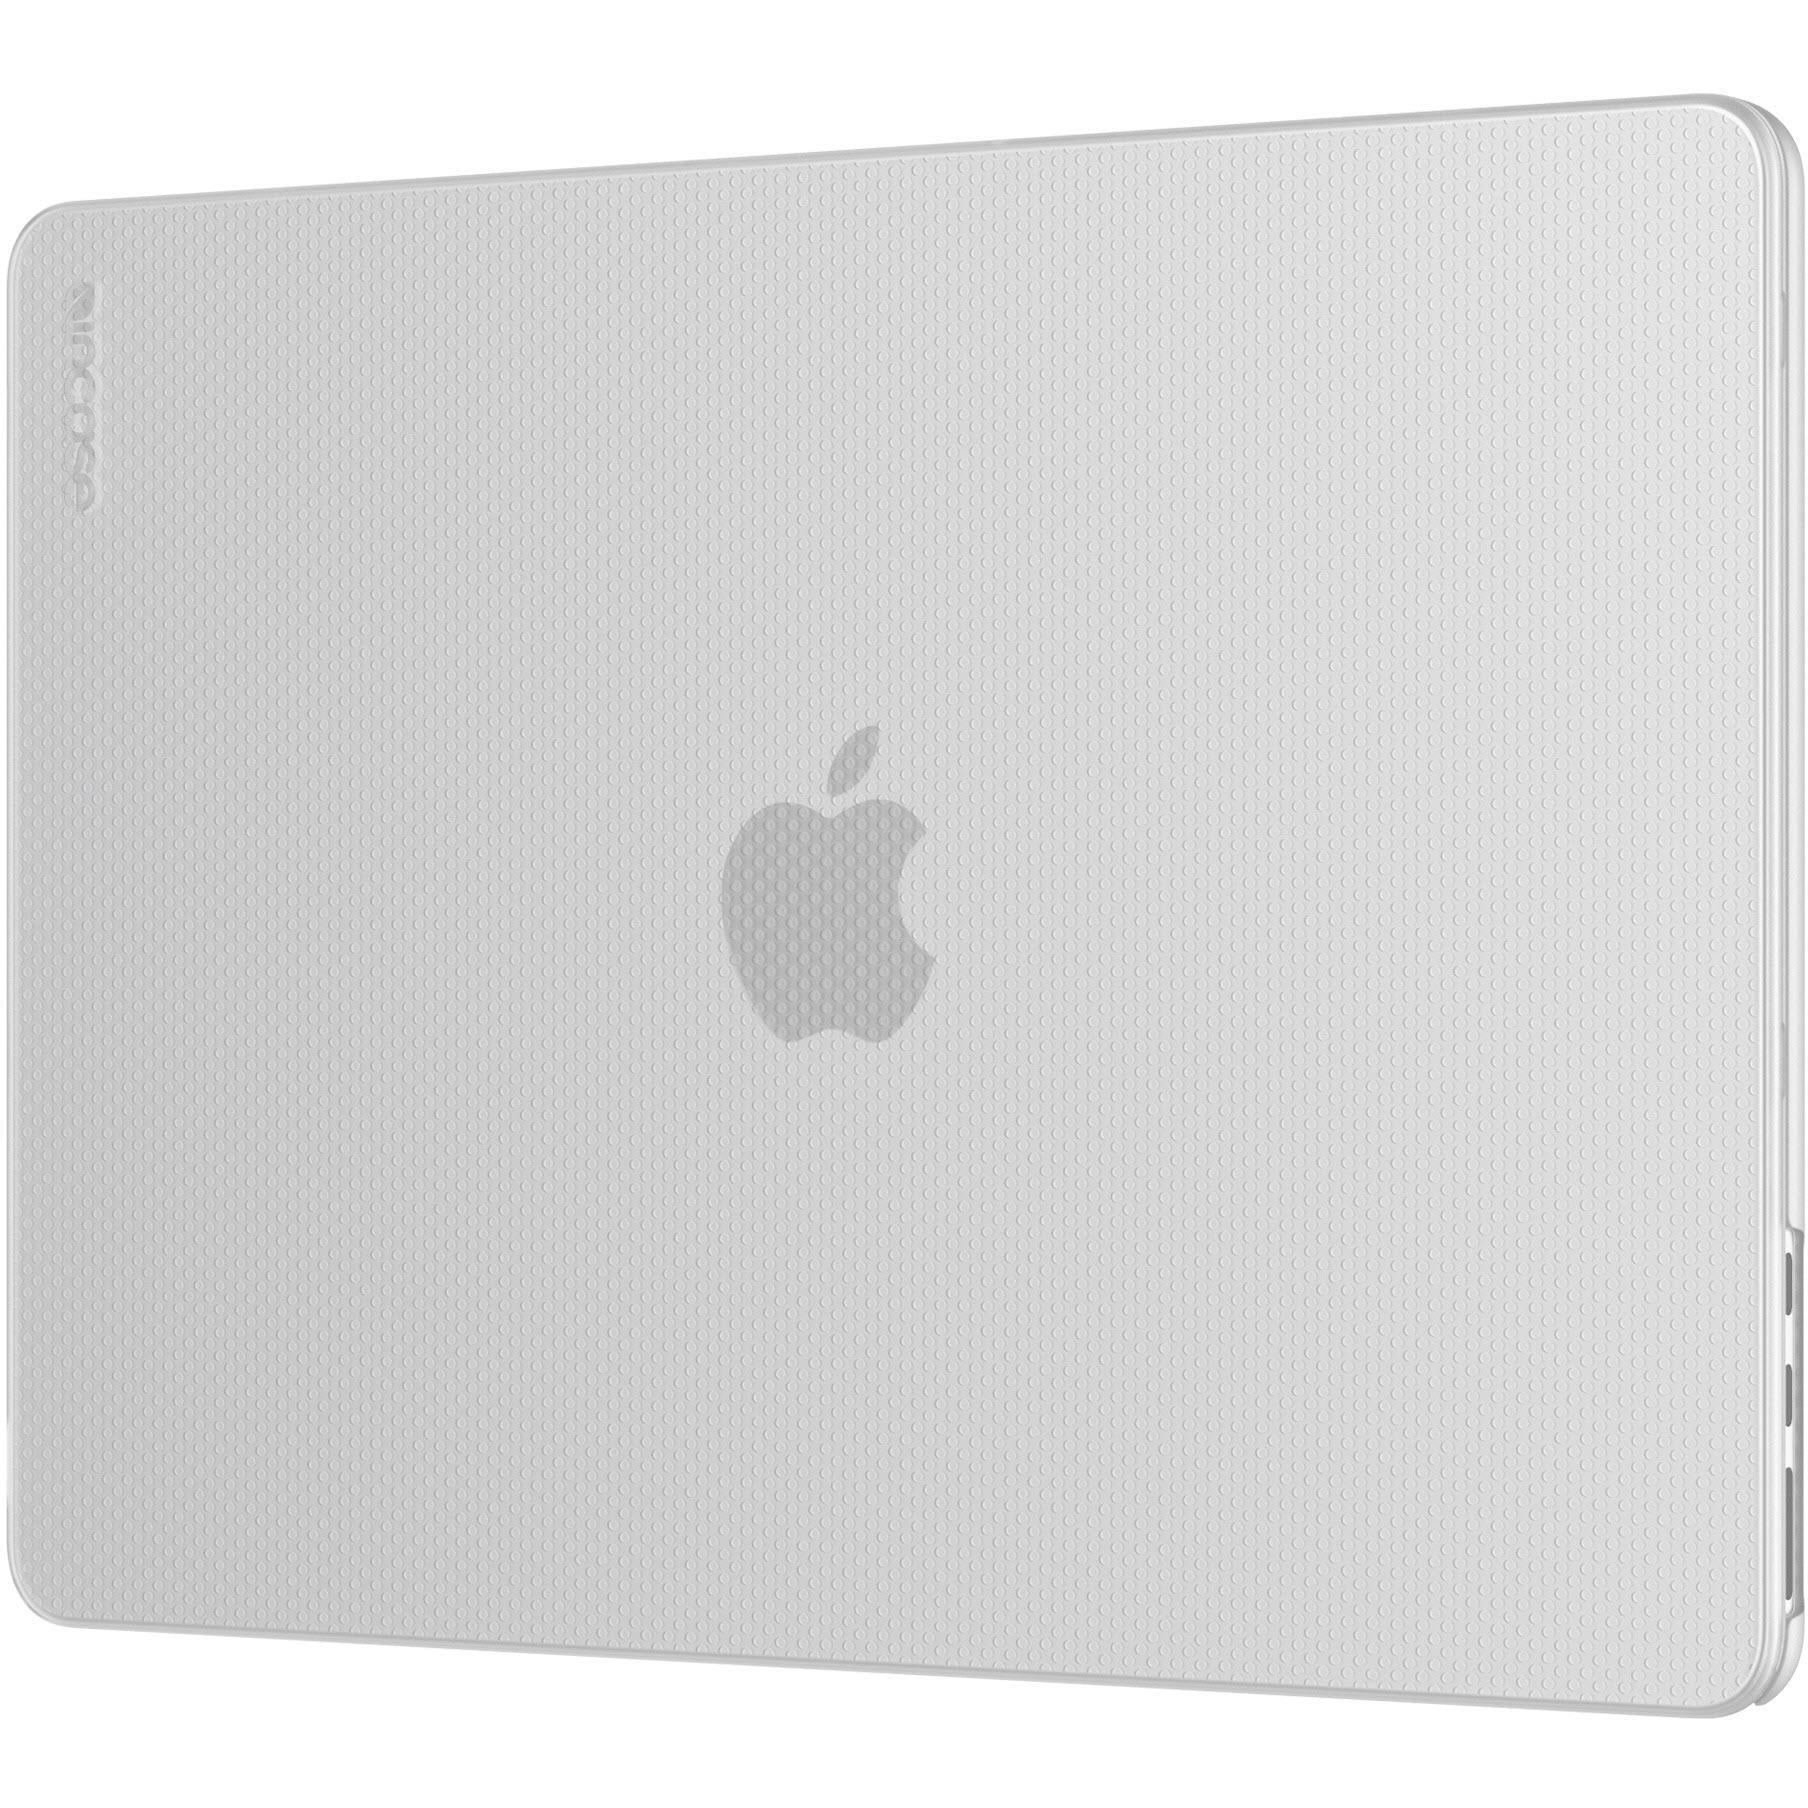 incase hardshell dots case for macbook air m2 (clear)